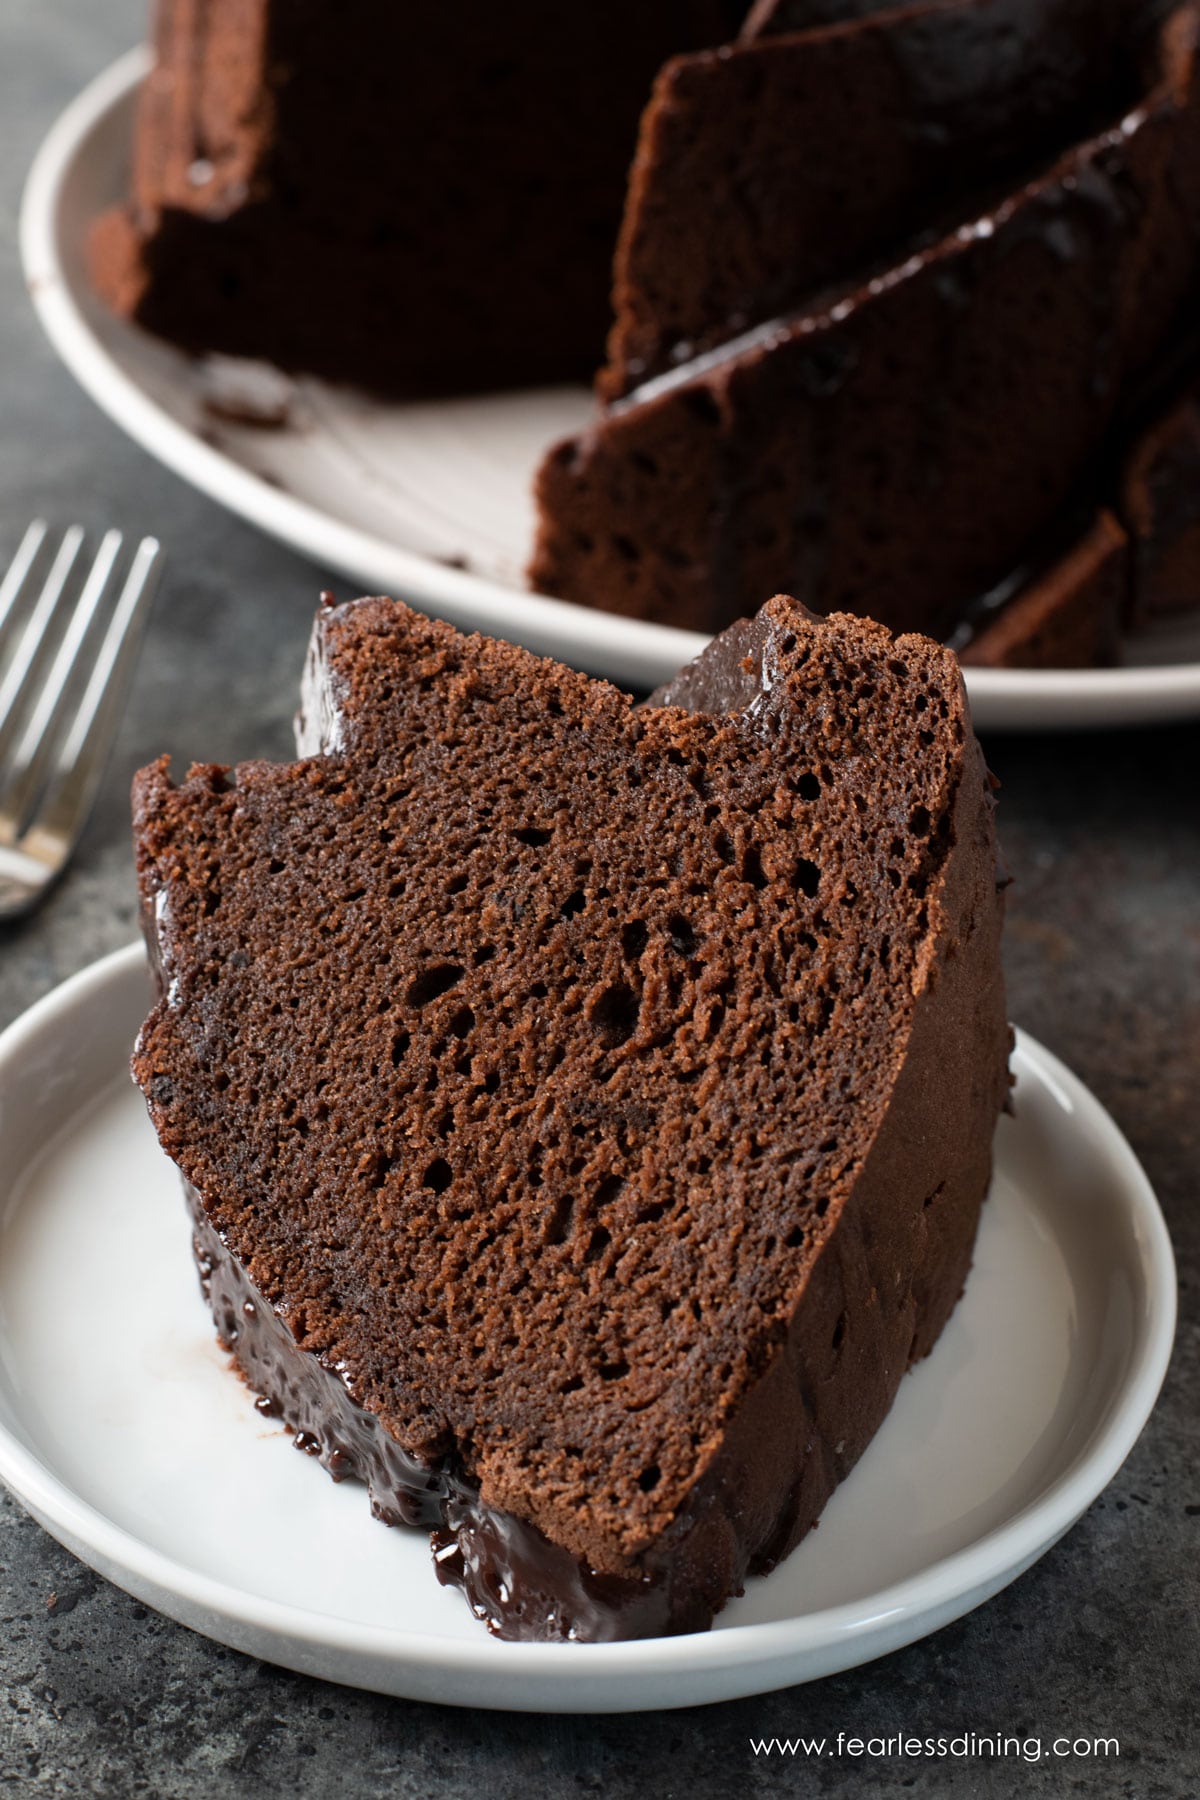 A close up of a slice of the chocolate cake on a plate.